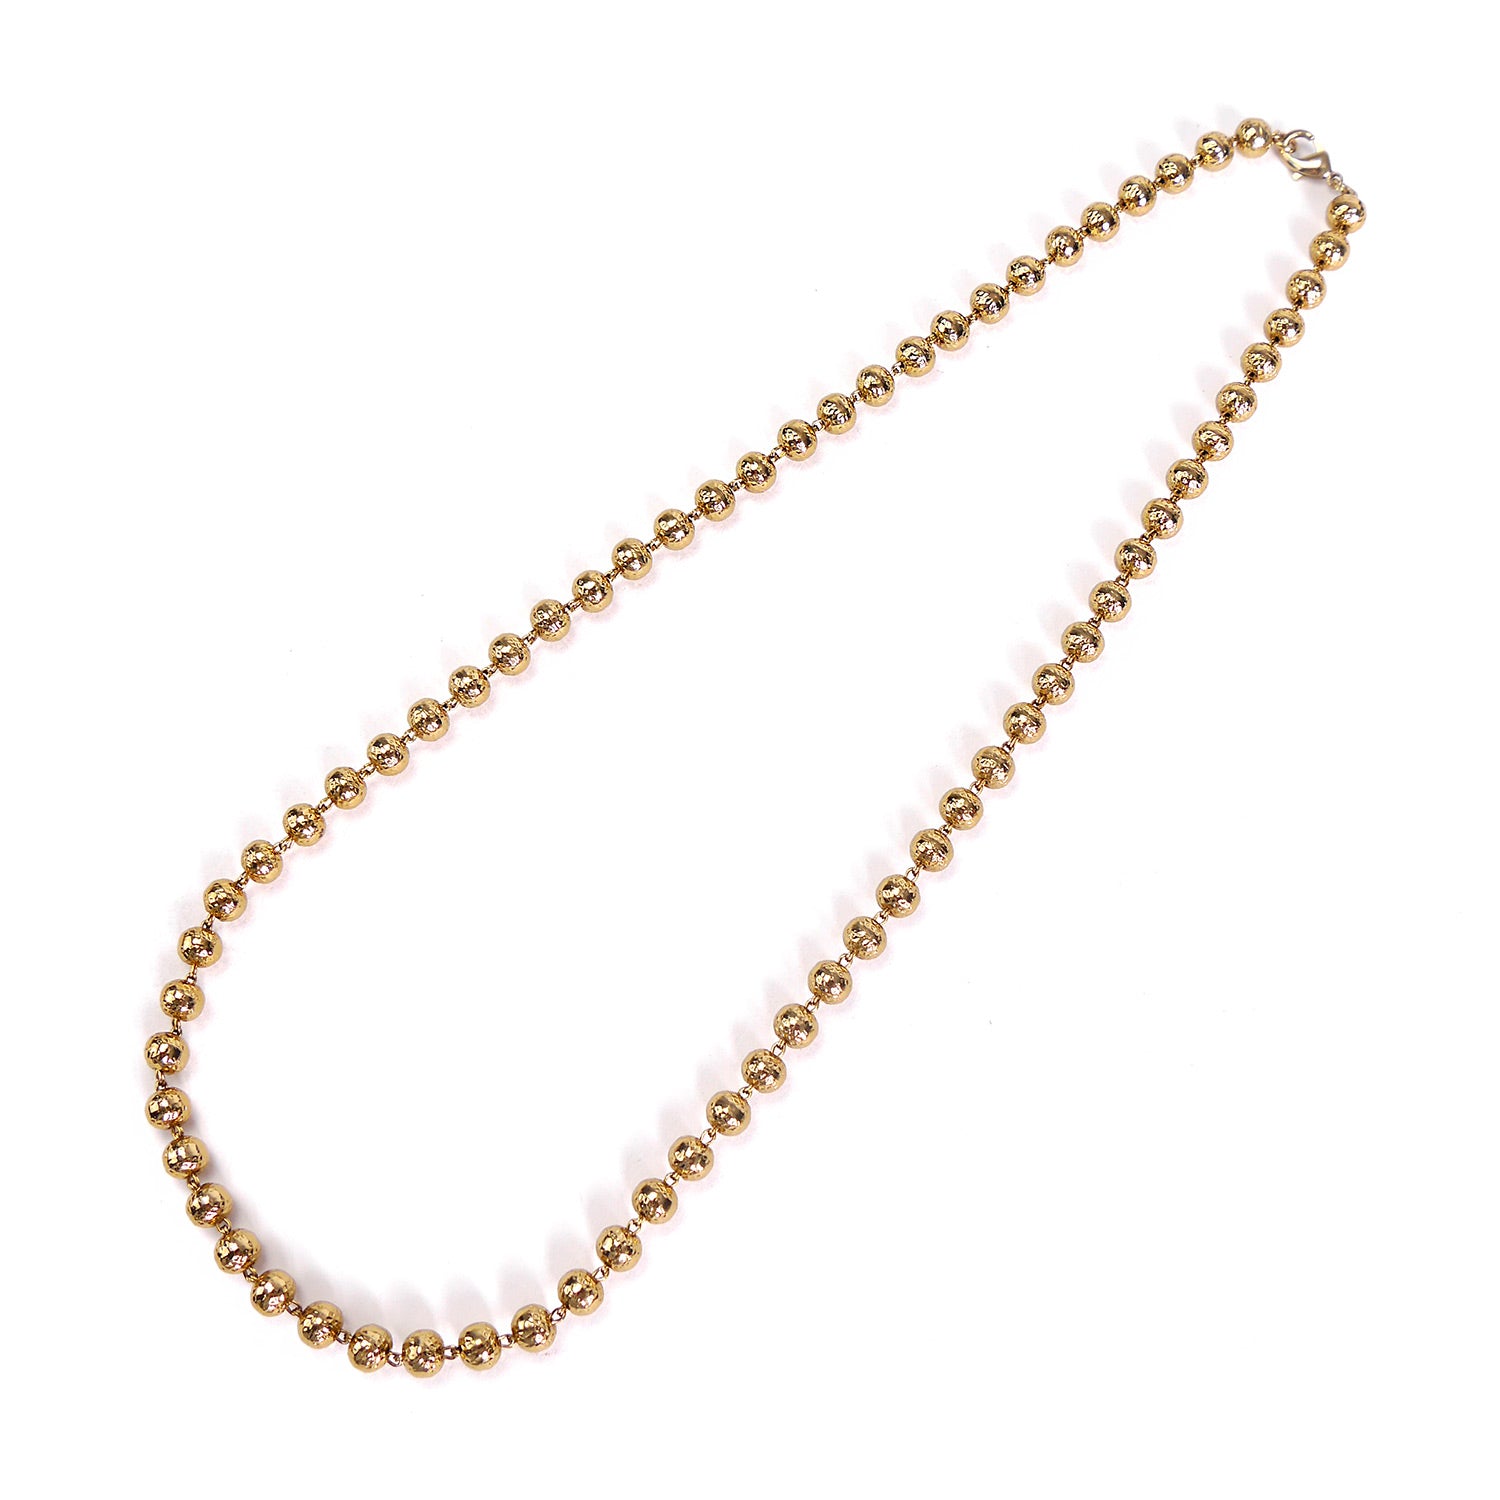 Mila Bead Chain in Gold